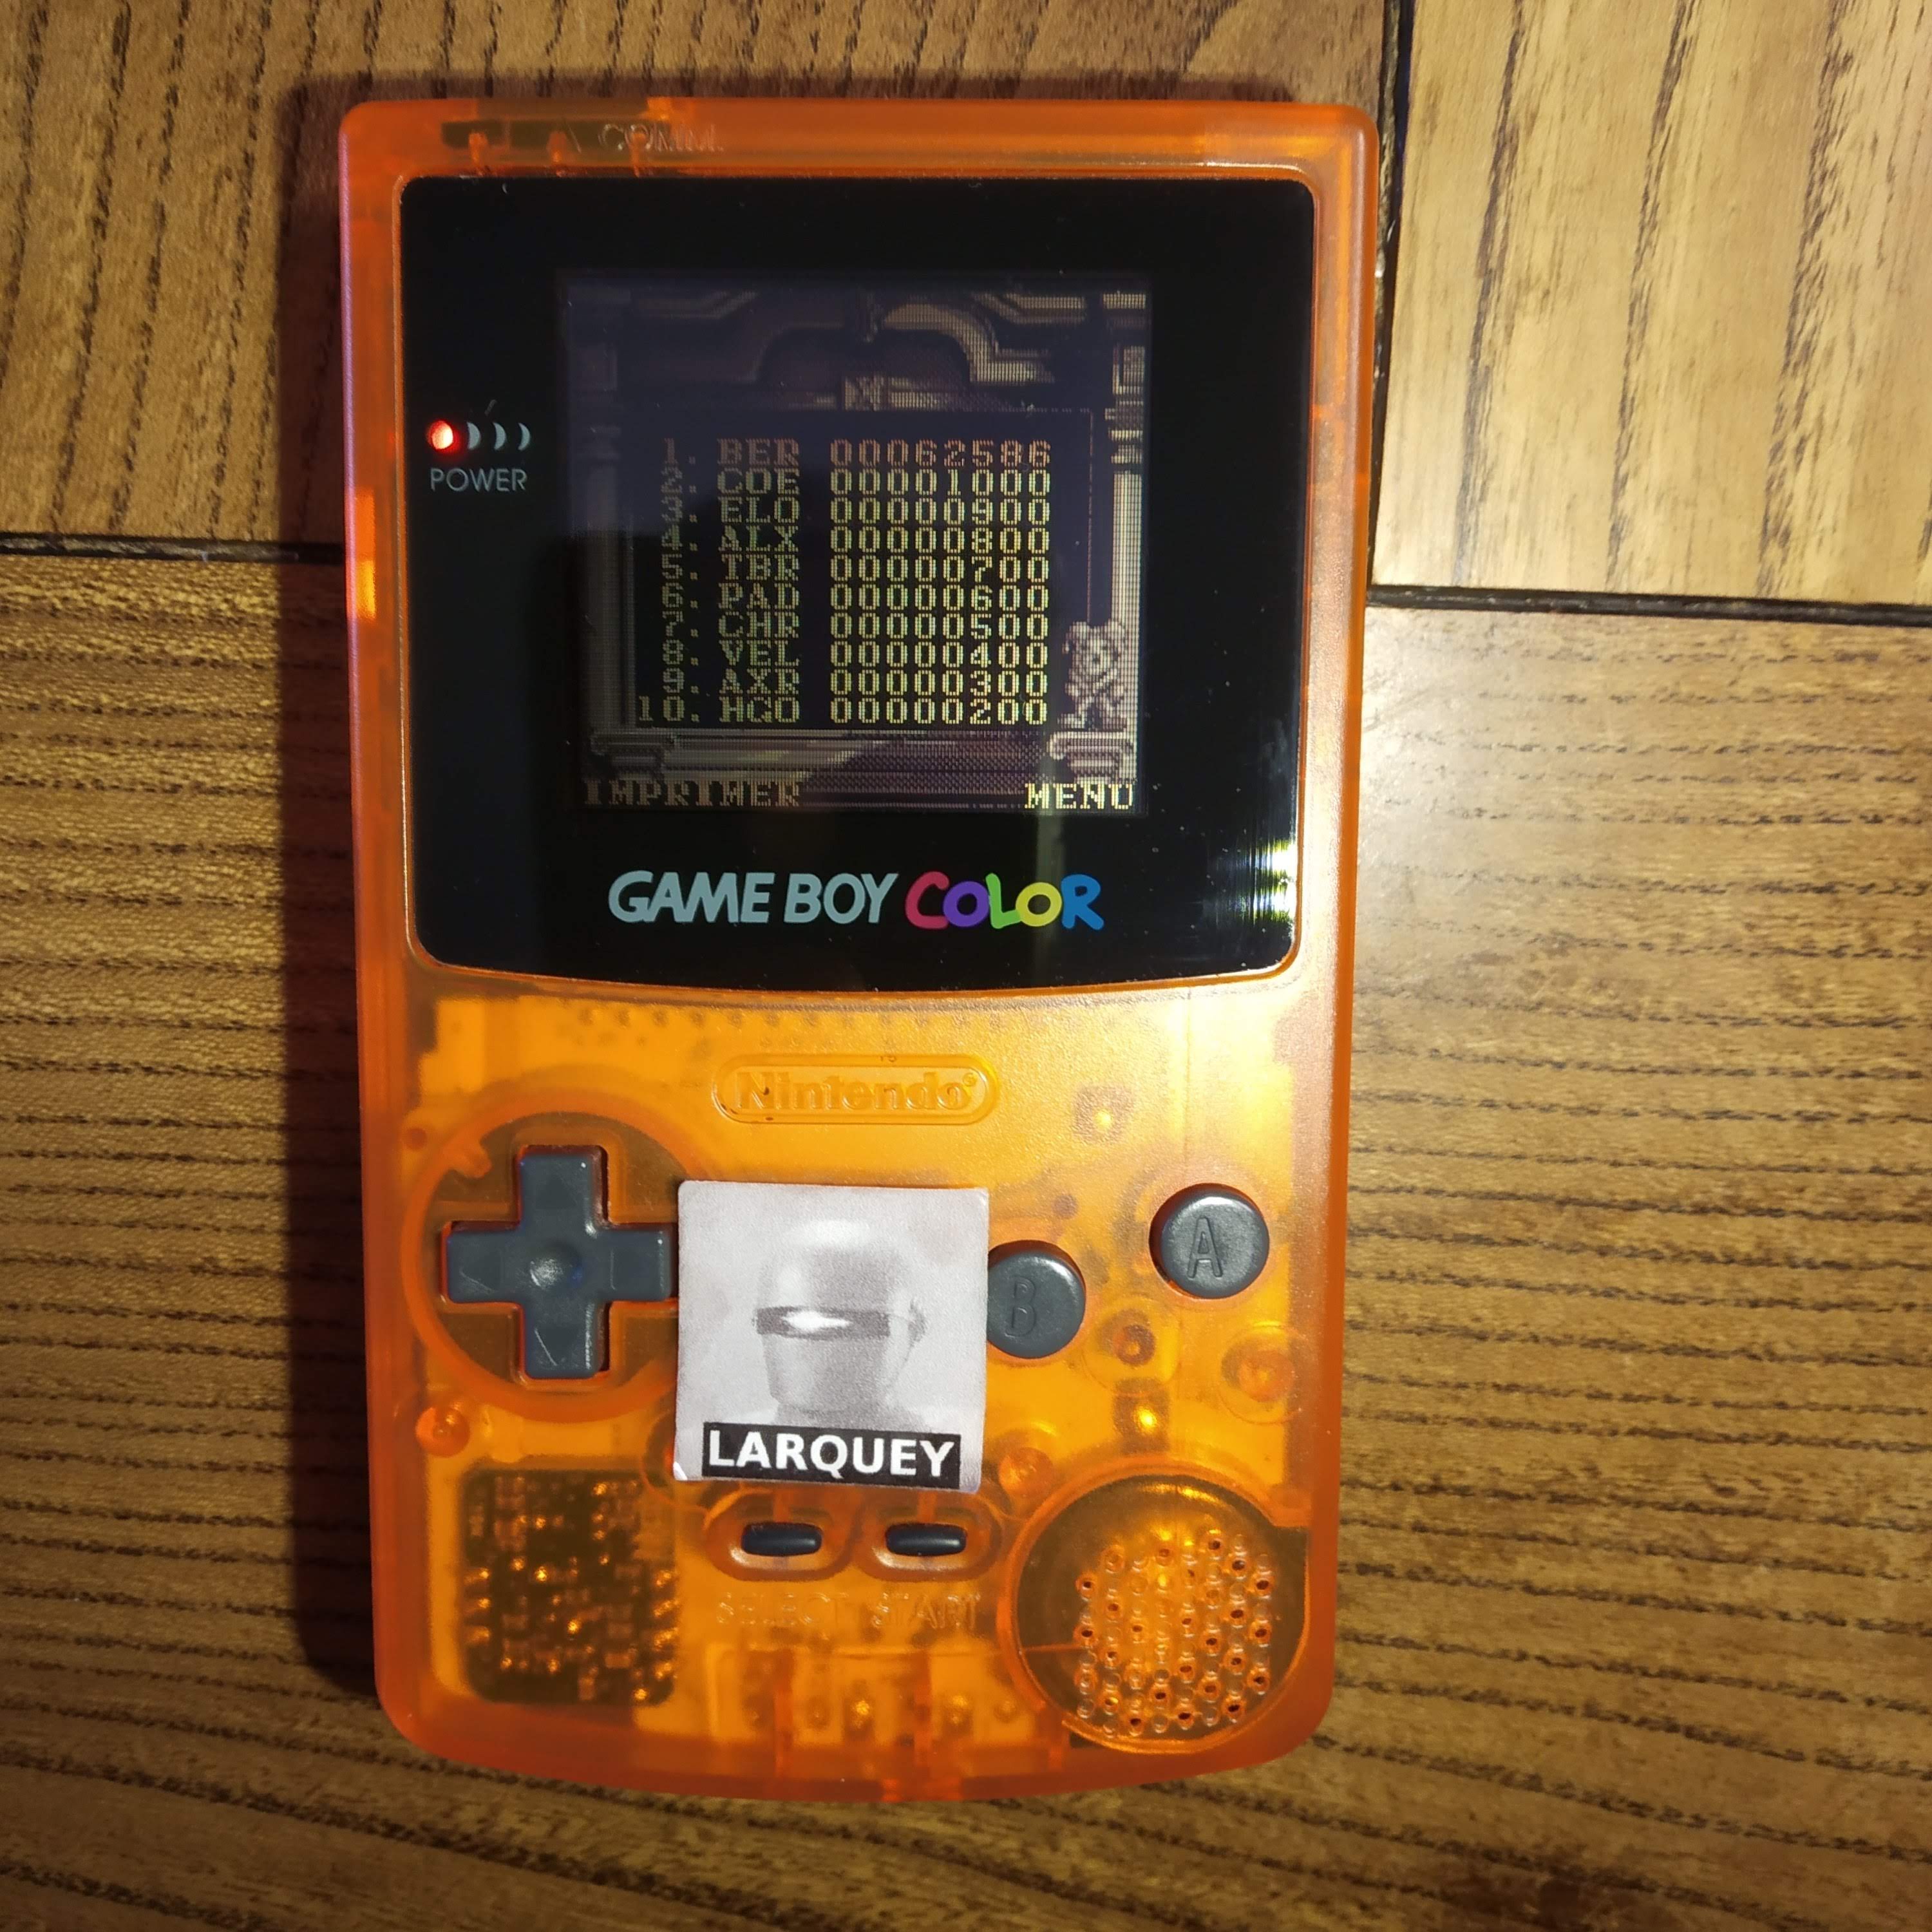 Larquey: Magical Drop [Easy] (Game Boy Color) 62,586 points on 2020-06-15 10:40:39